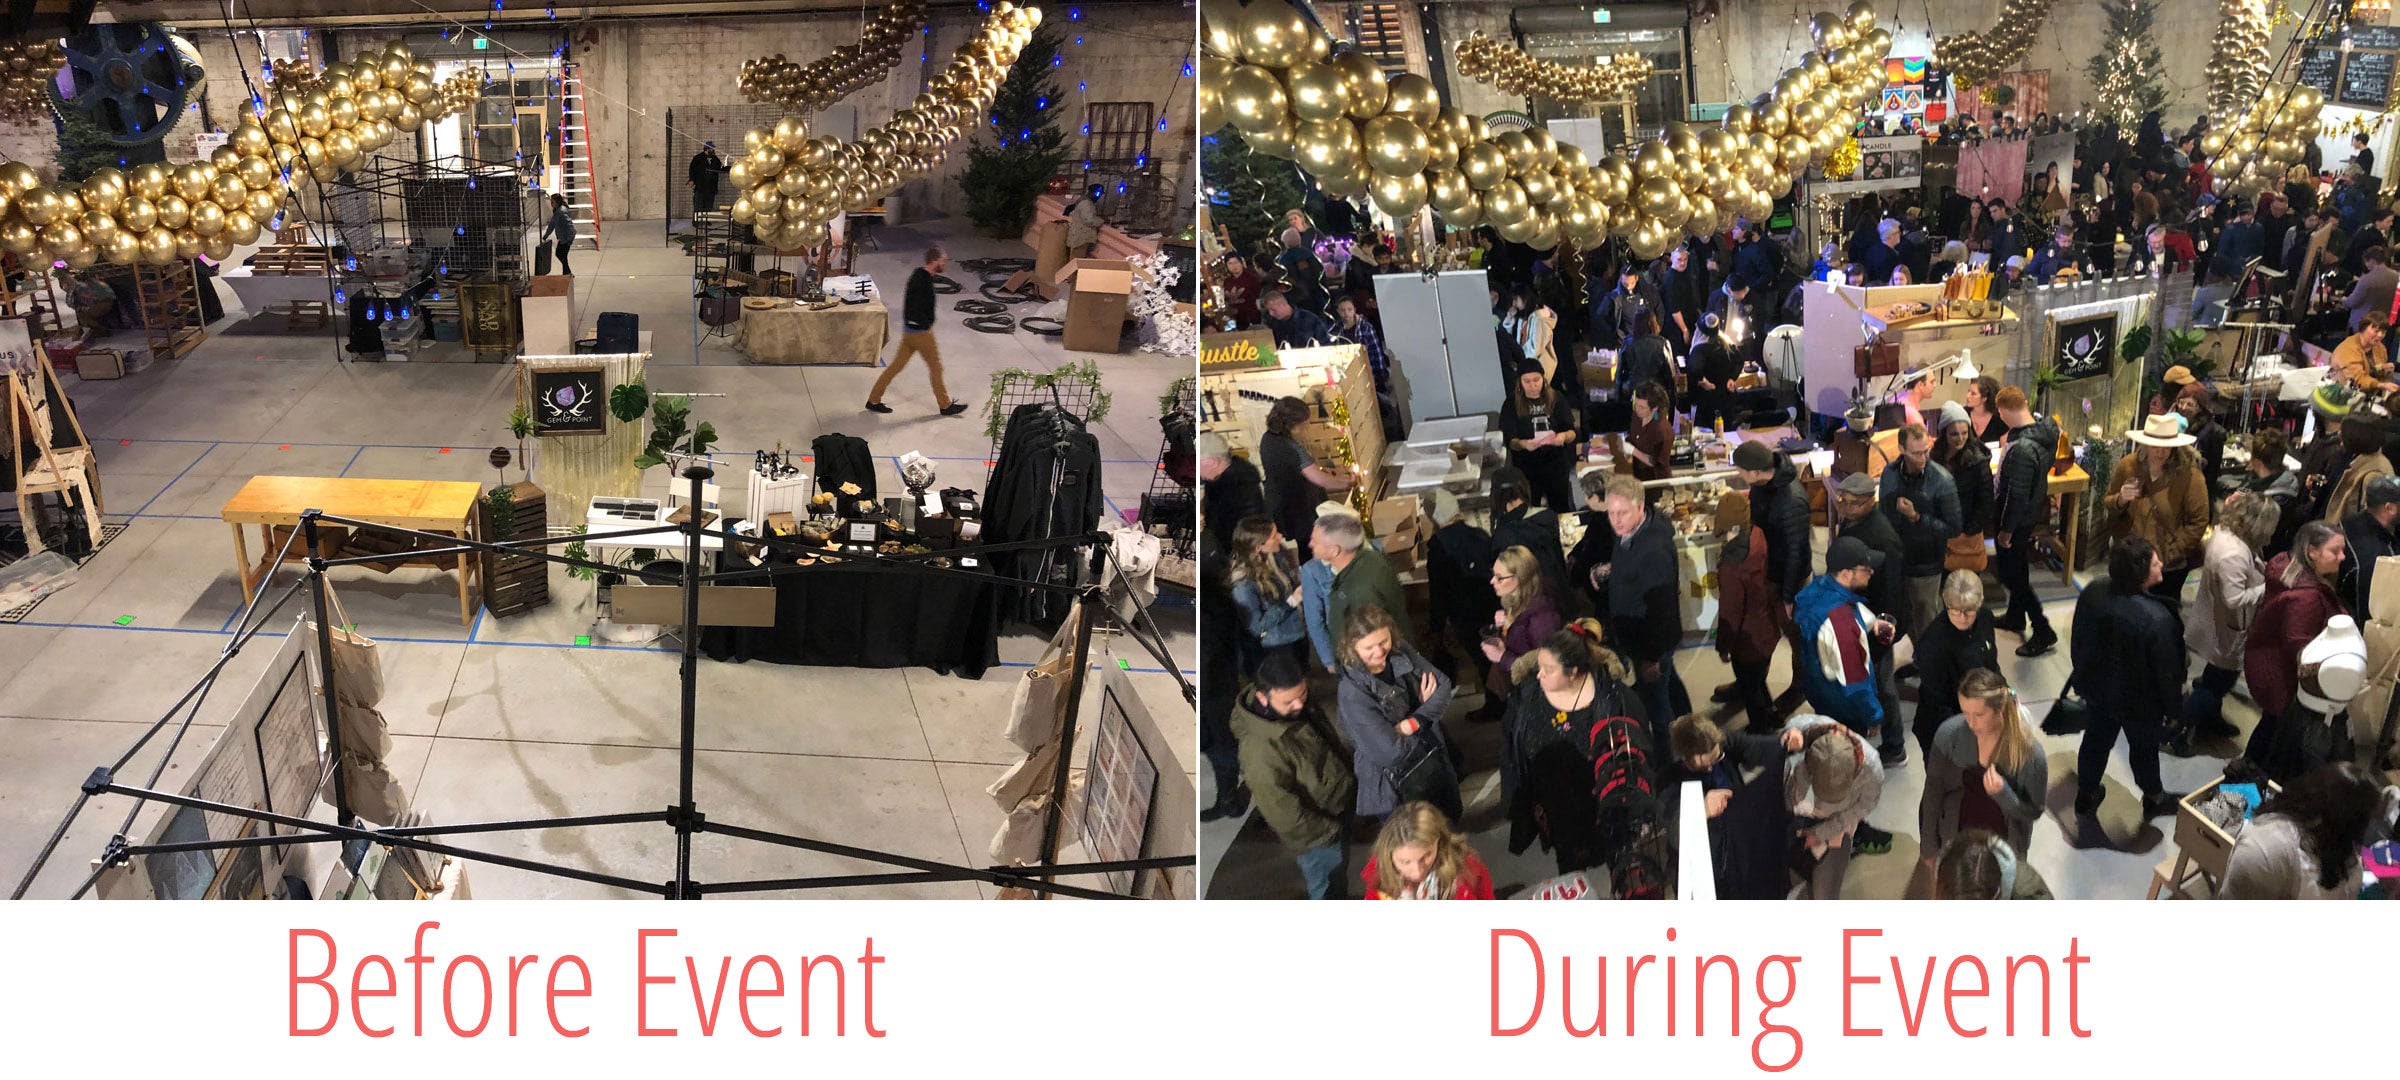 Portland Night Market before and after the show